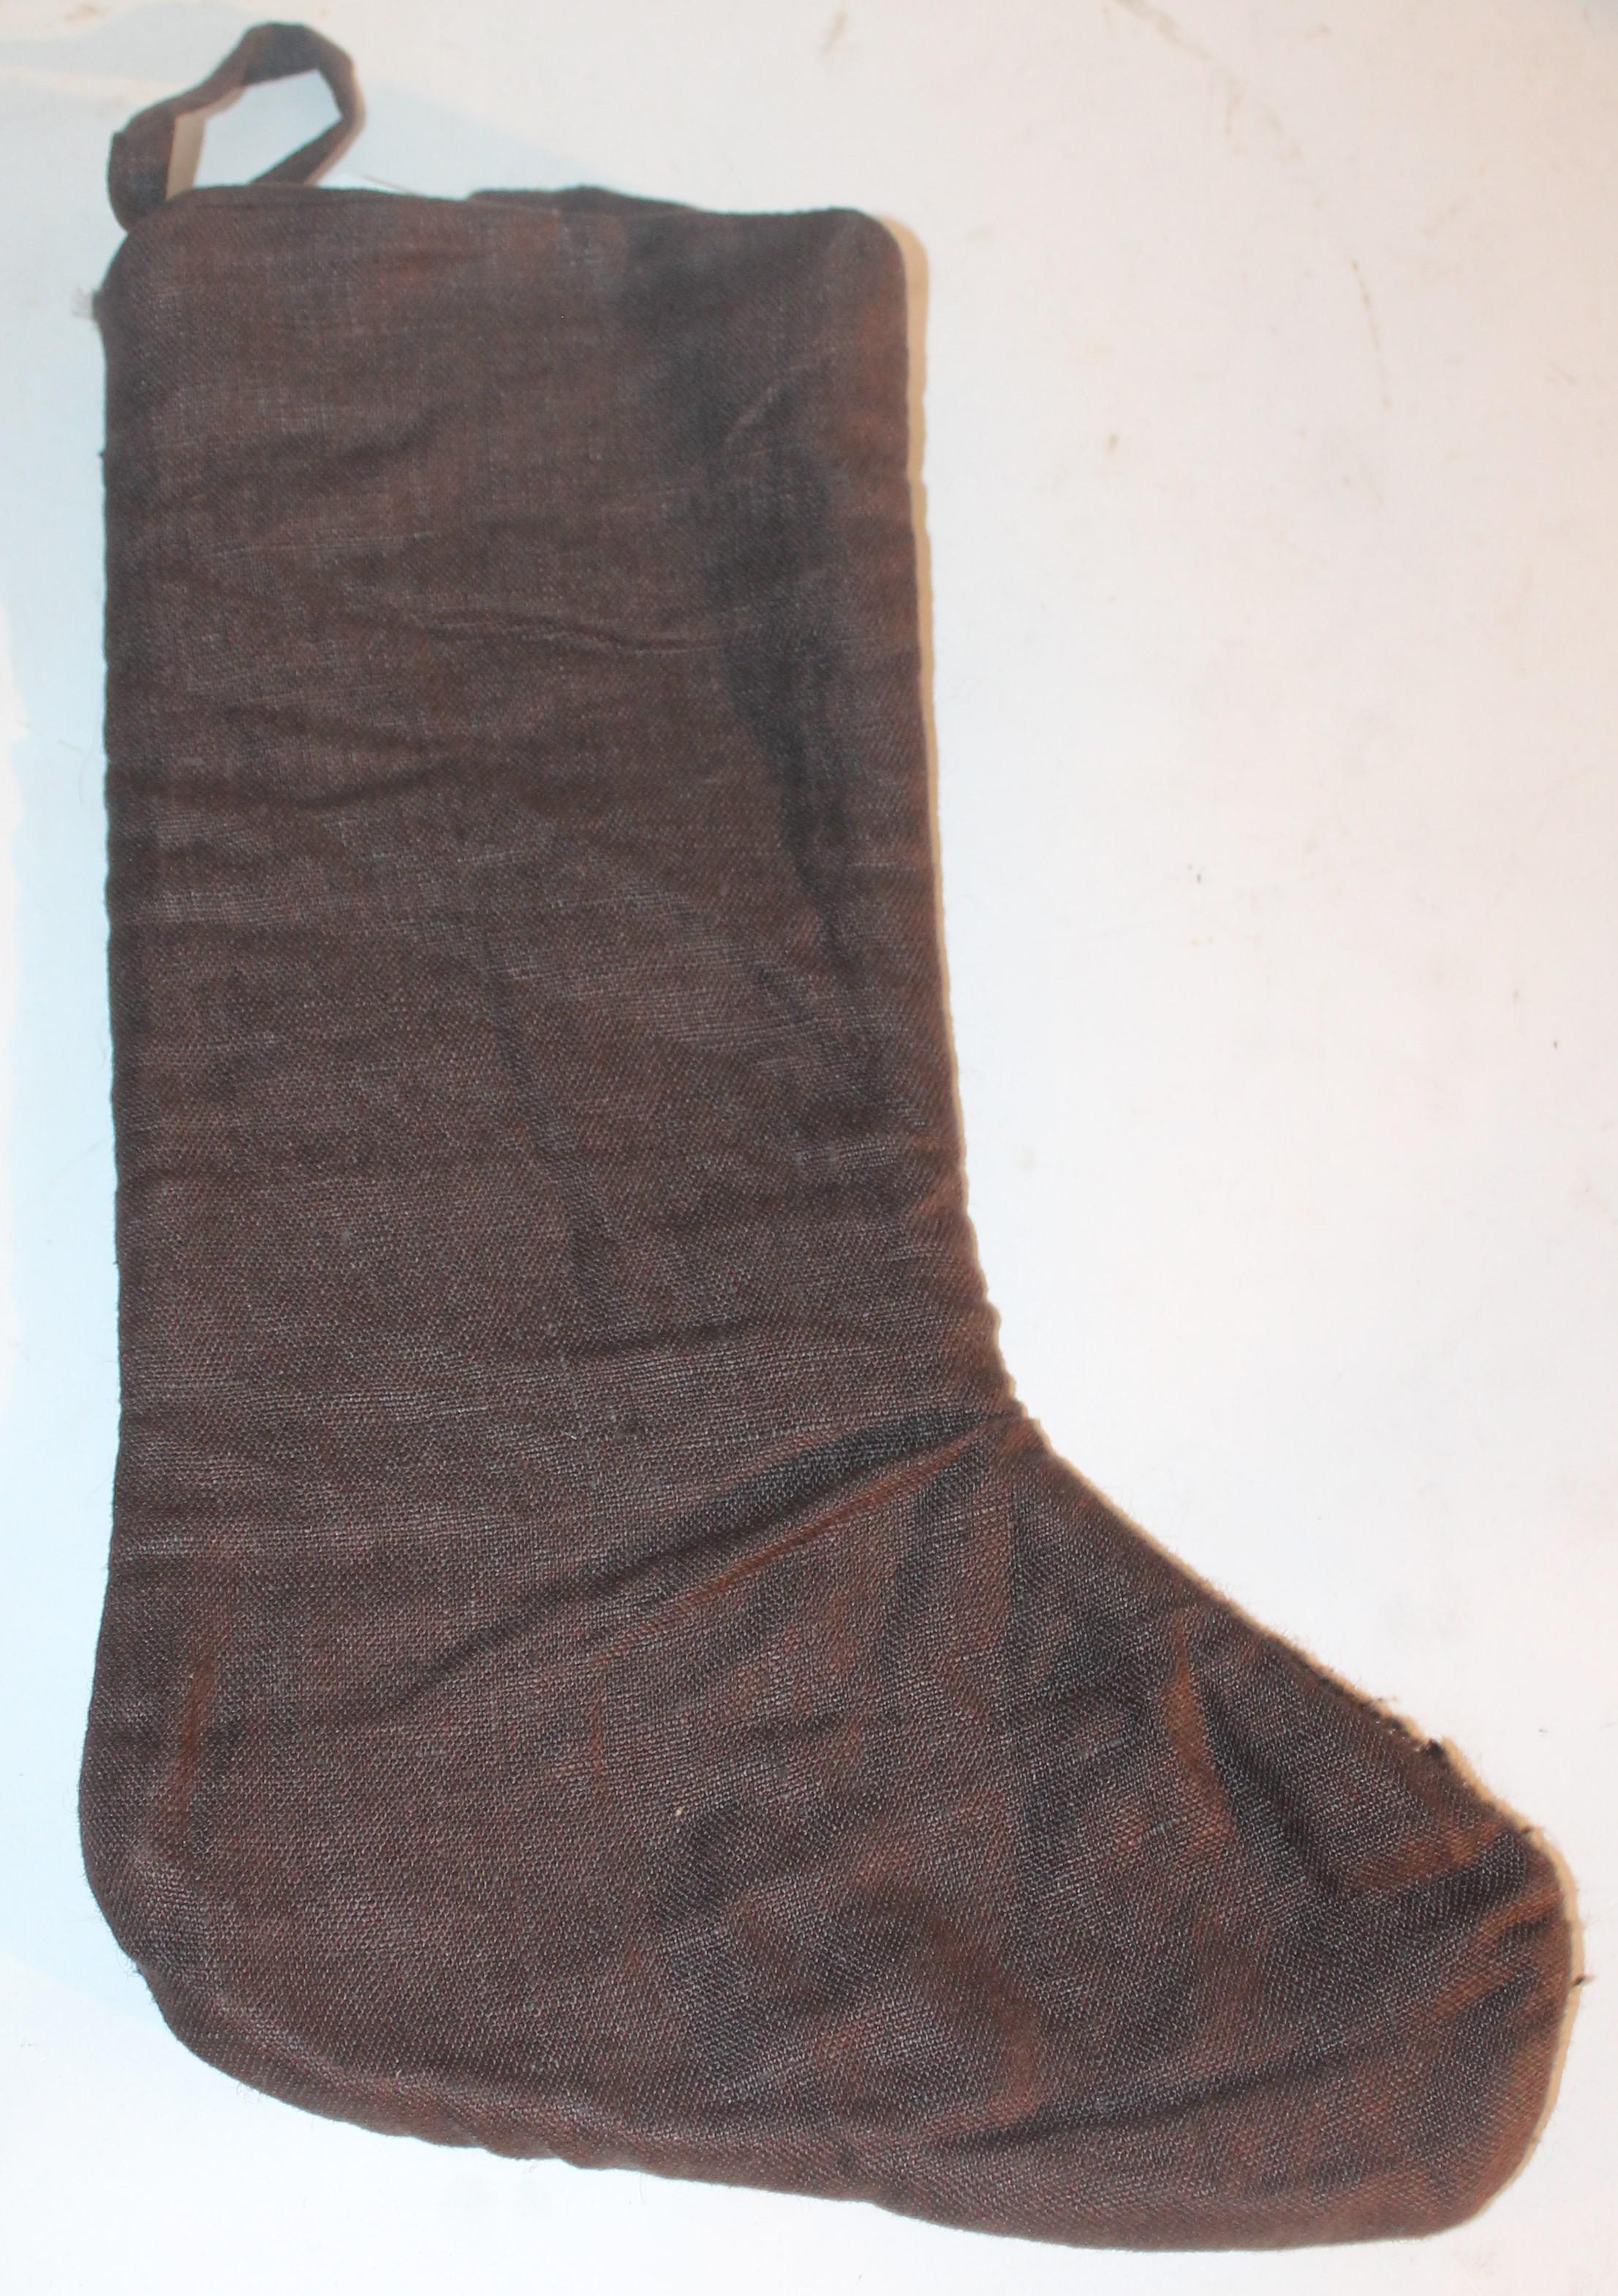 Adirondack Mexican or American Indian Weaving Stockings, 3